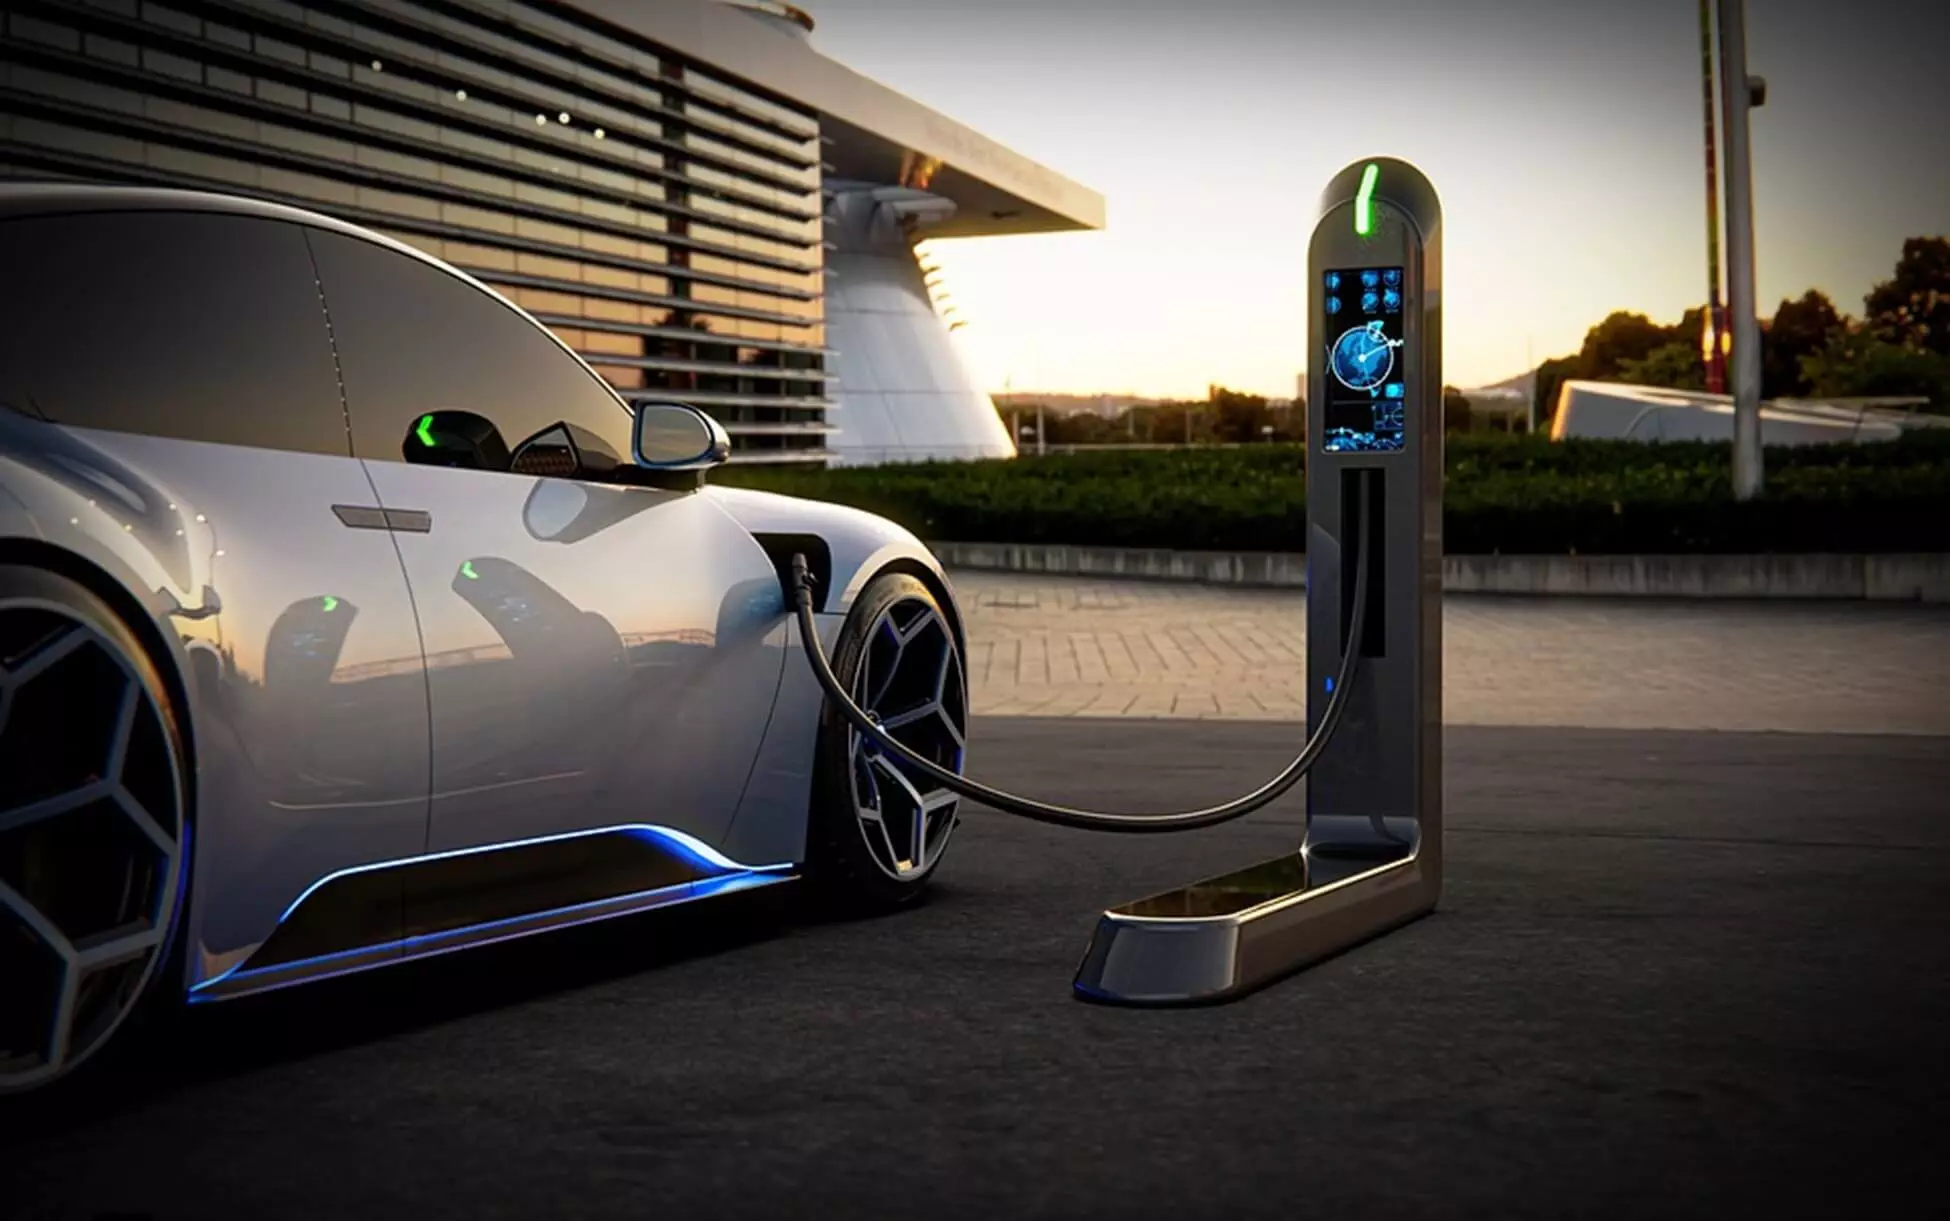 Electric car plugged into a charging station